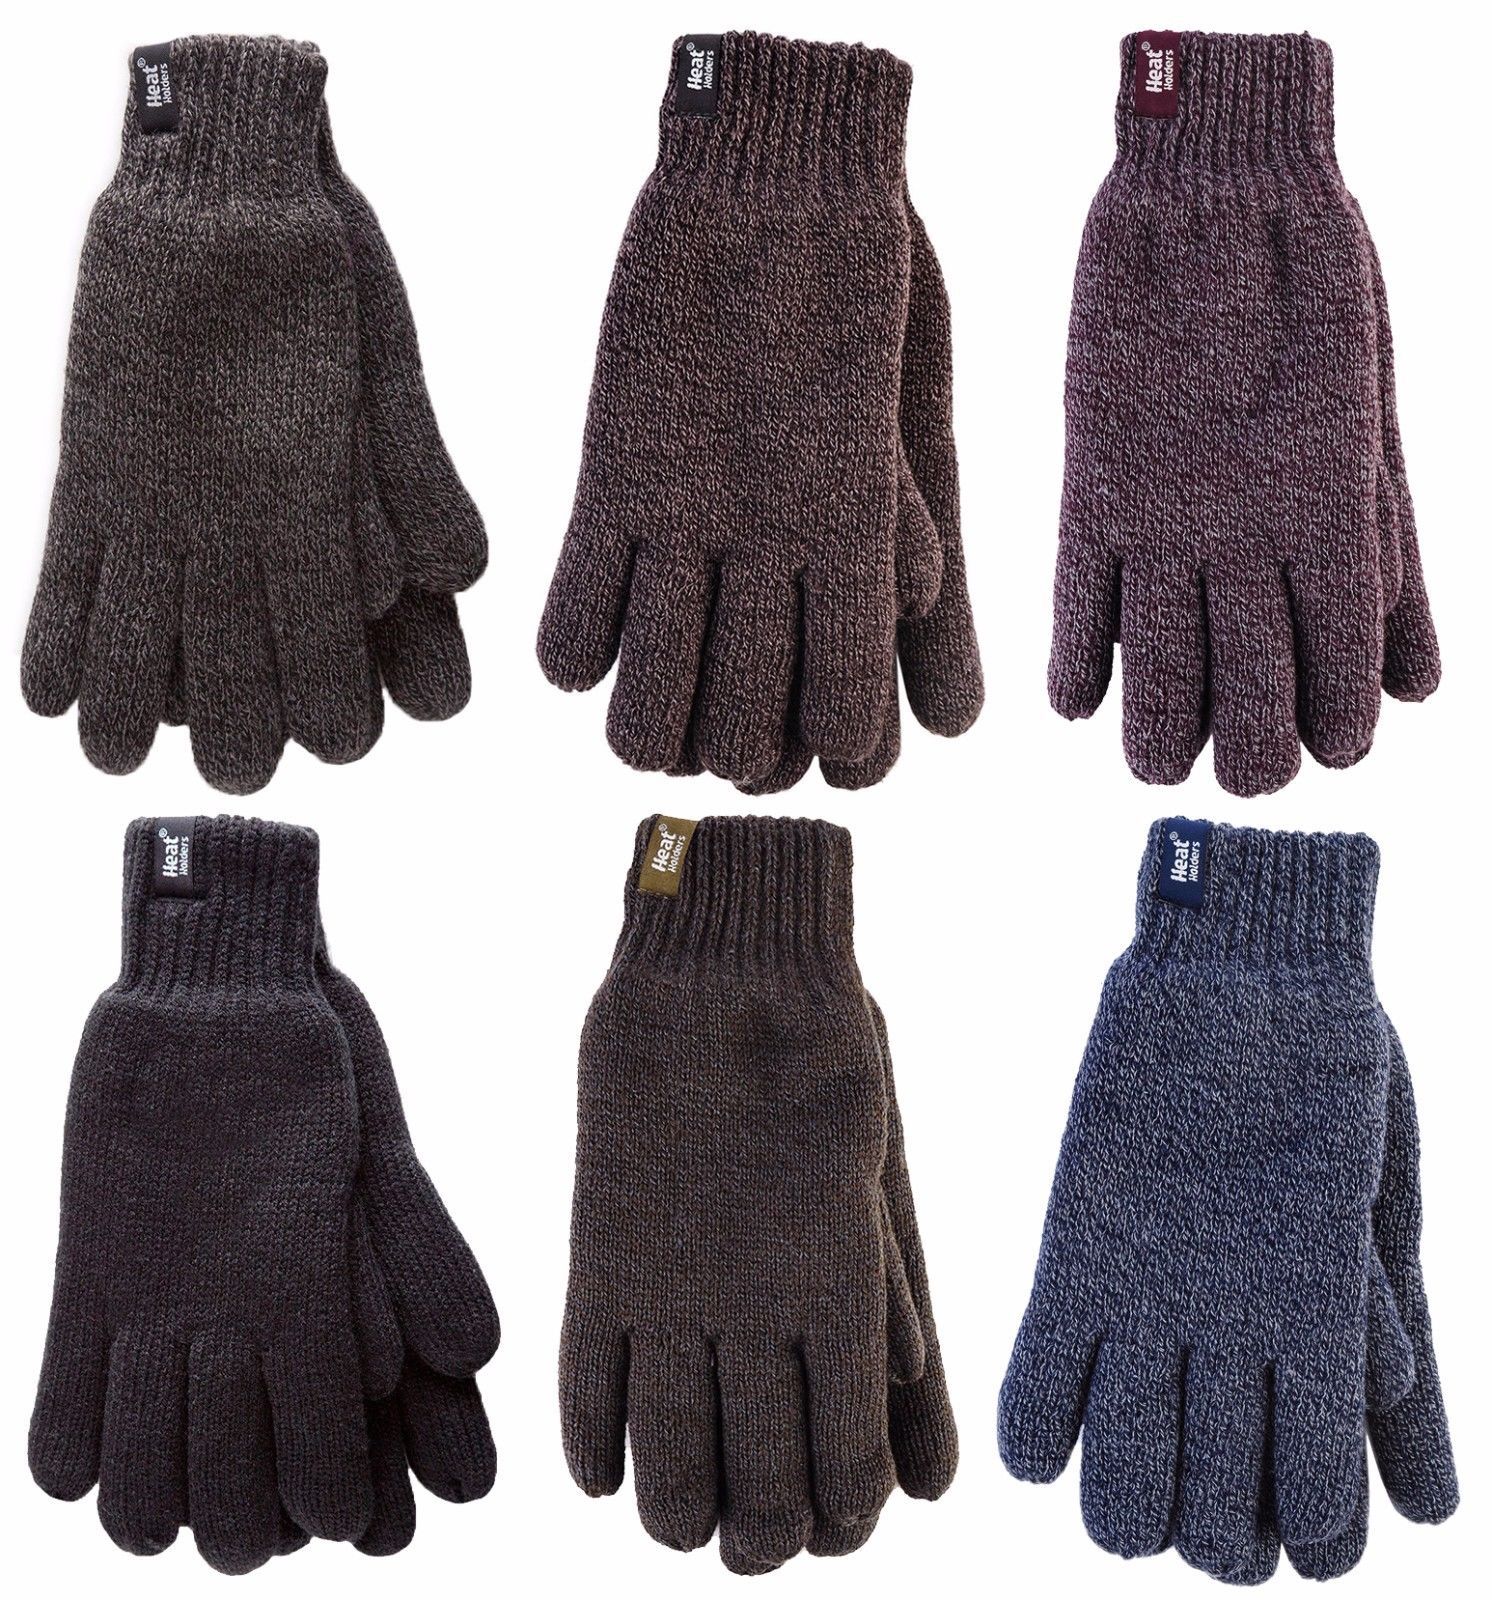 Heat Holders - Mens Warm Knitted Insulated Thermal Cold Weather Winter Gloves